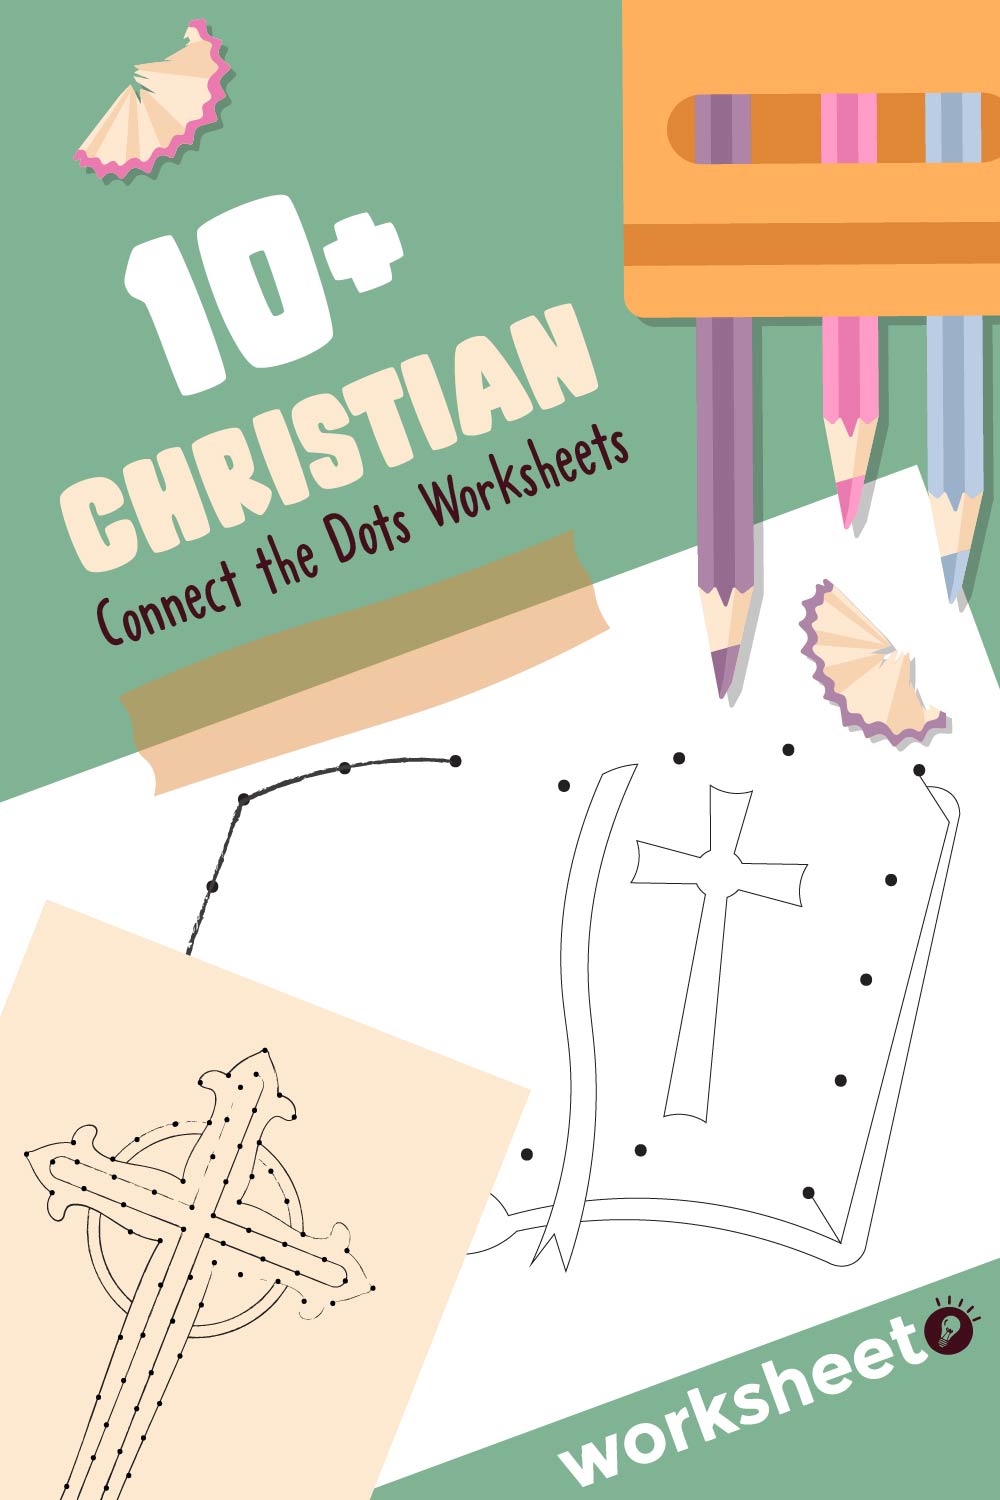 10 Images of Christian Connect The Dots Worksheets